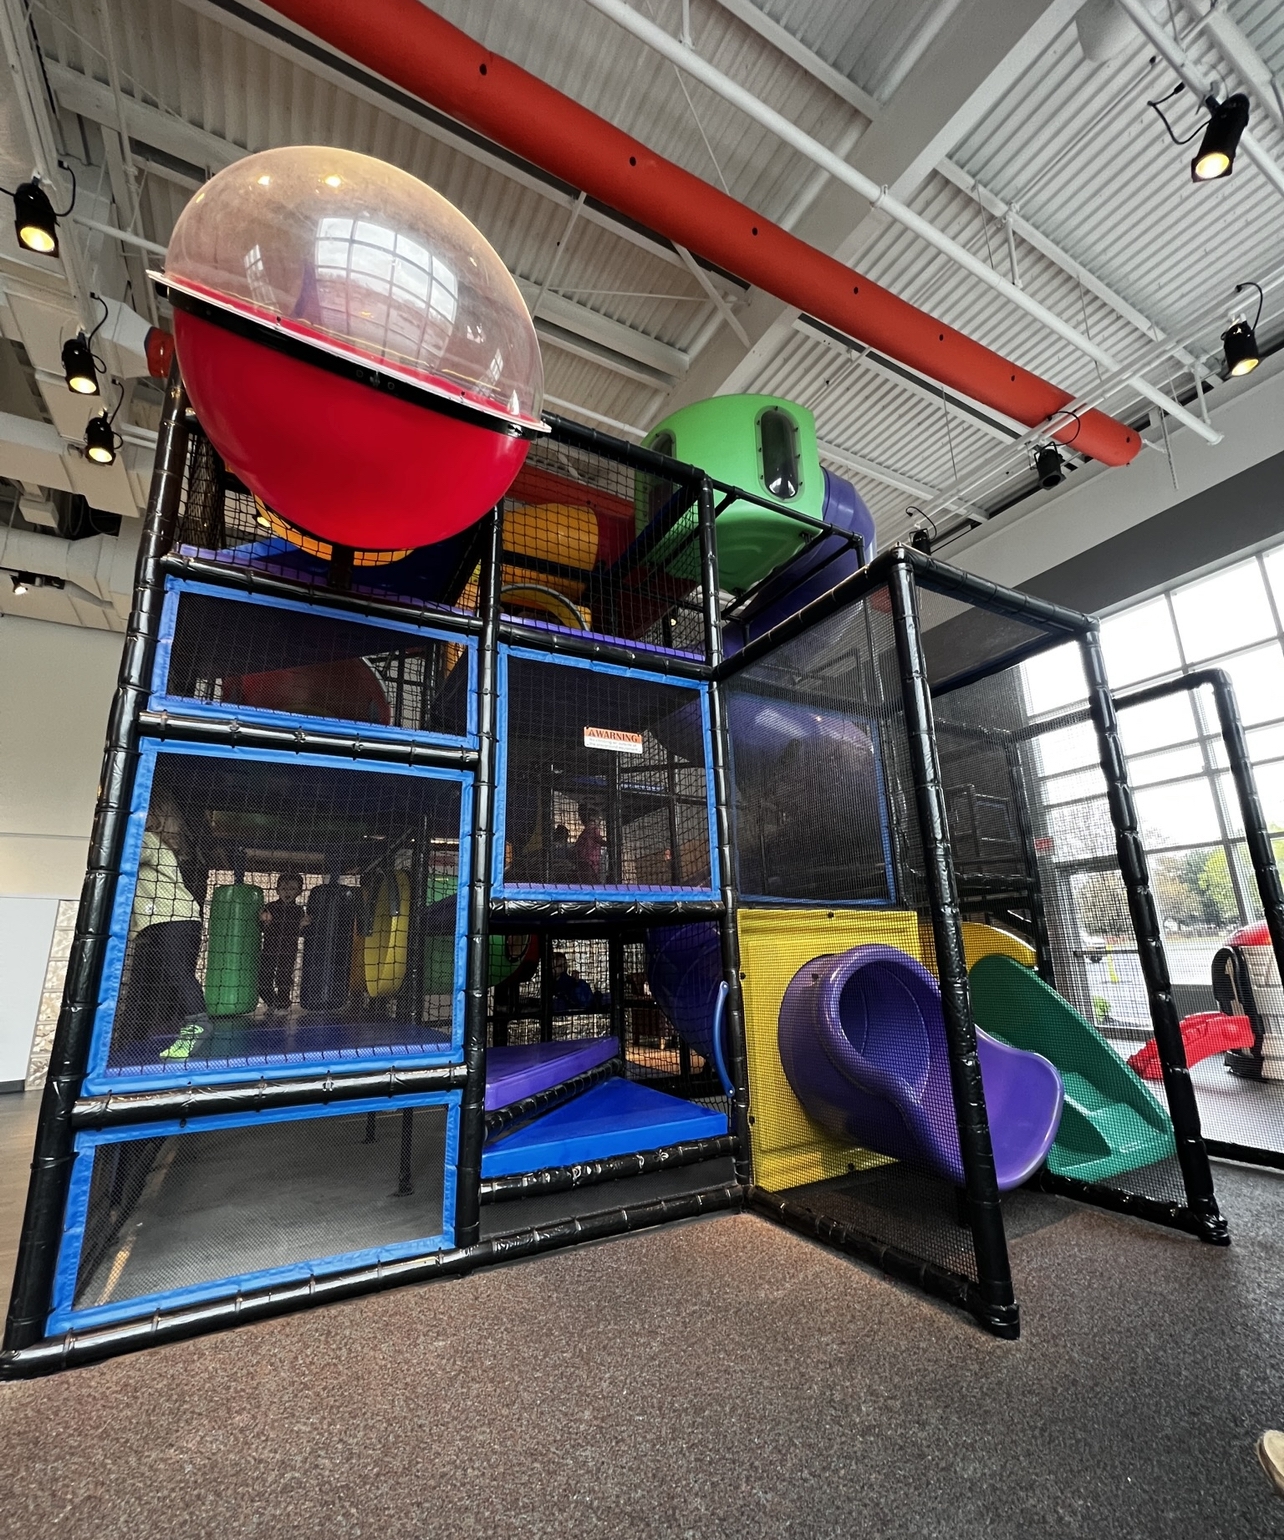 Free Indoor Open Play Spots for Family Fun in Central Ohio